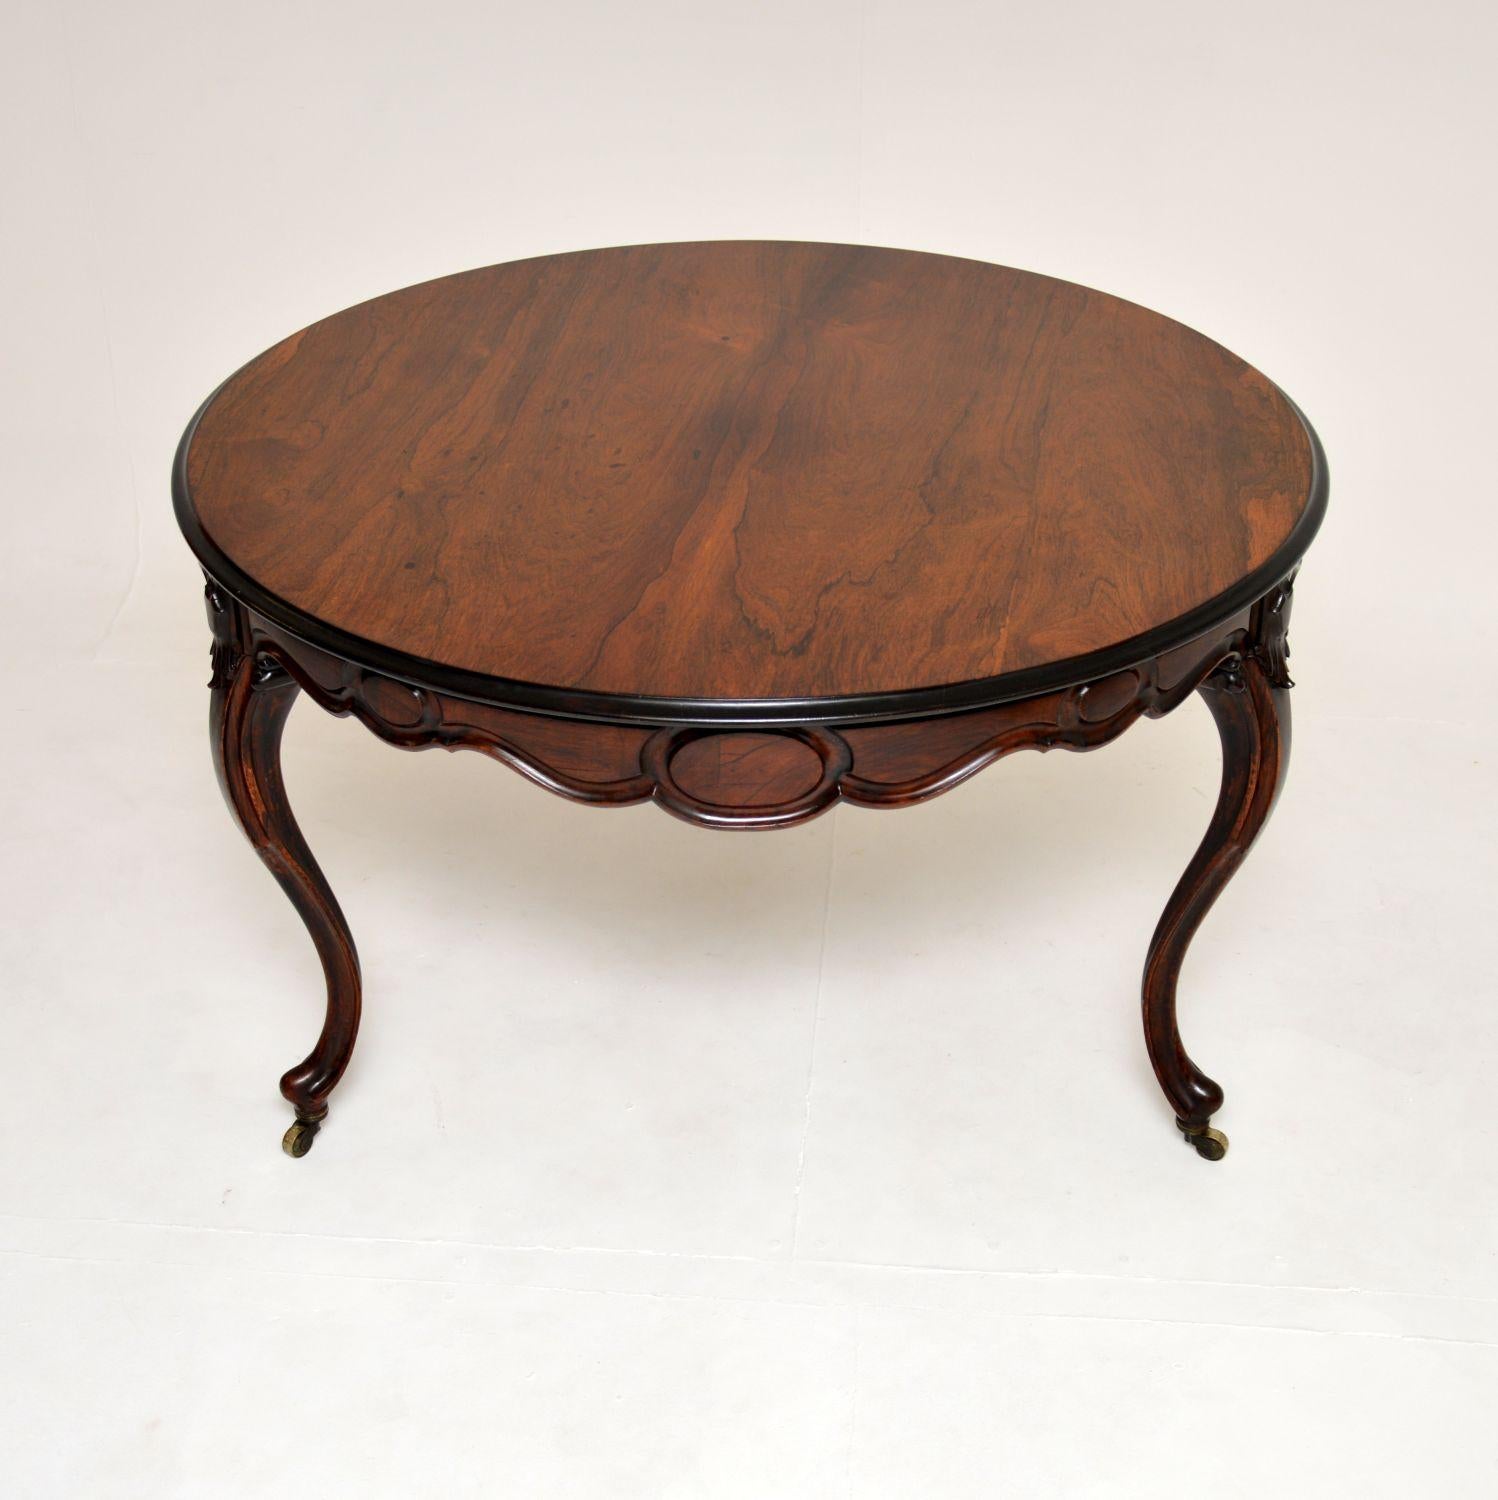 A beautiful and quite unusual antique French circular dining table. This dates from around the 1850-1870 period.

It is of outstanding quality and has a beautiful design. It sits on three beautifully carved solid legs, meaning that it can seat six